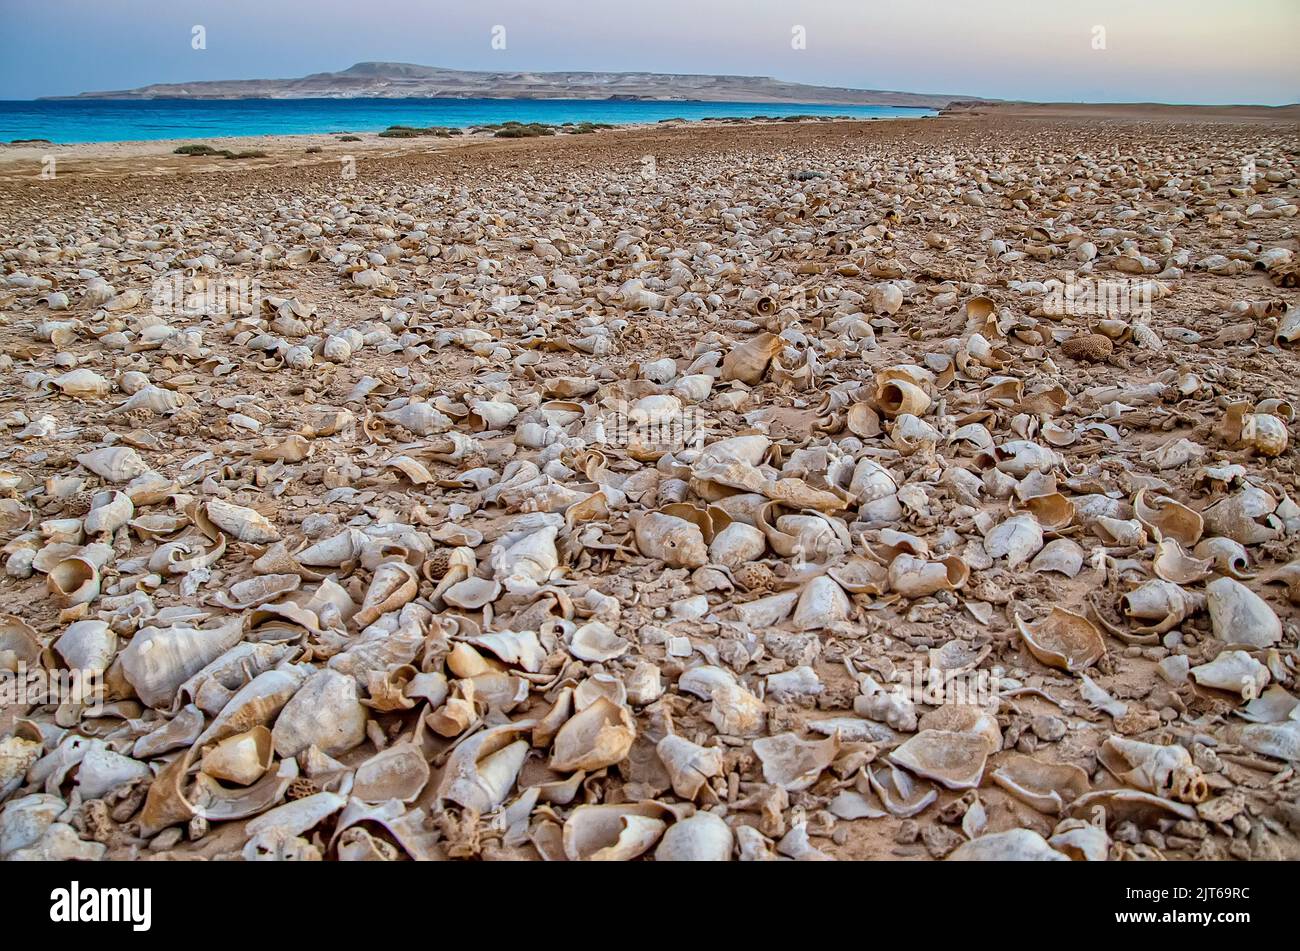 Seashore of a desert island covered with thousands of shells Stock Photo